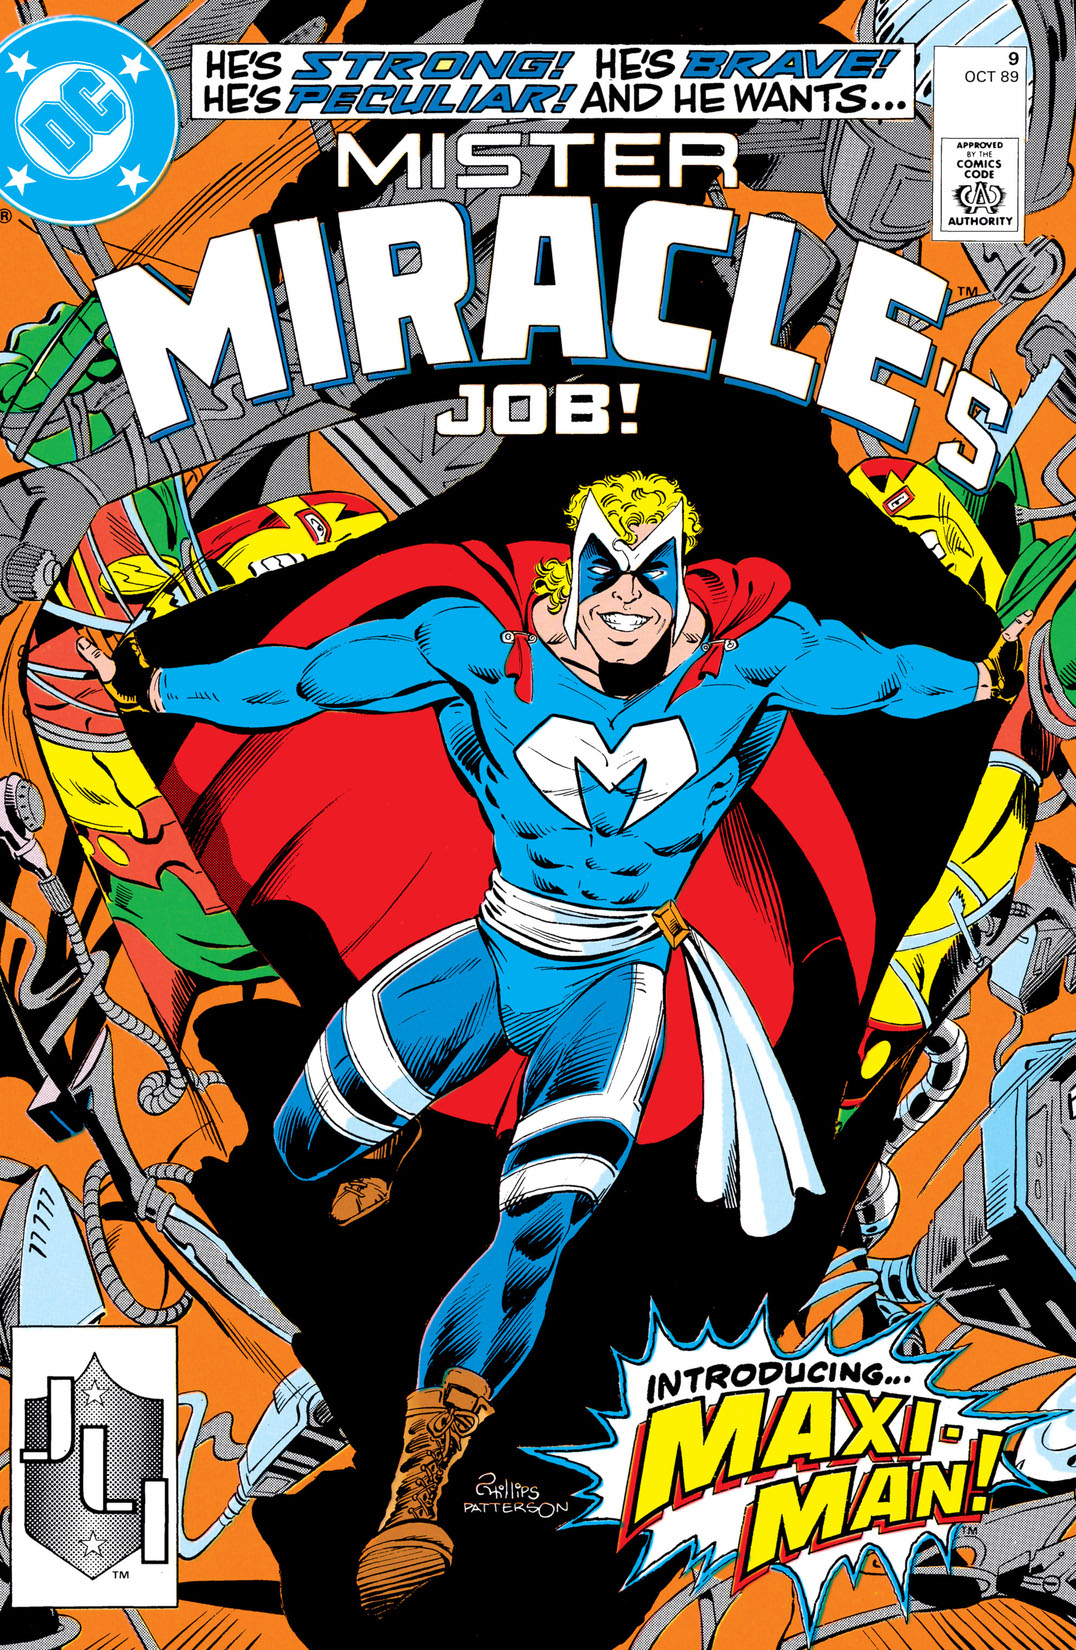 Mister Miracle (1988-) #9 preview images